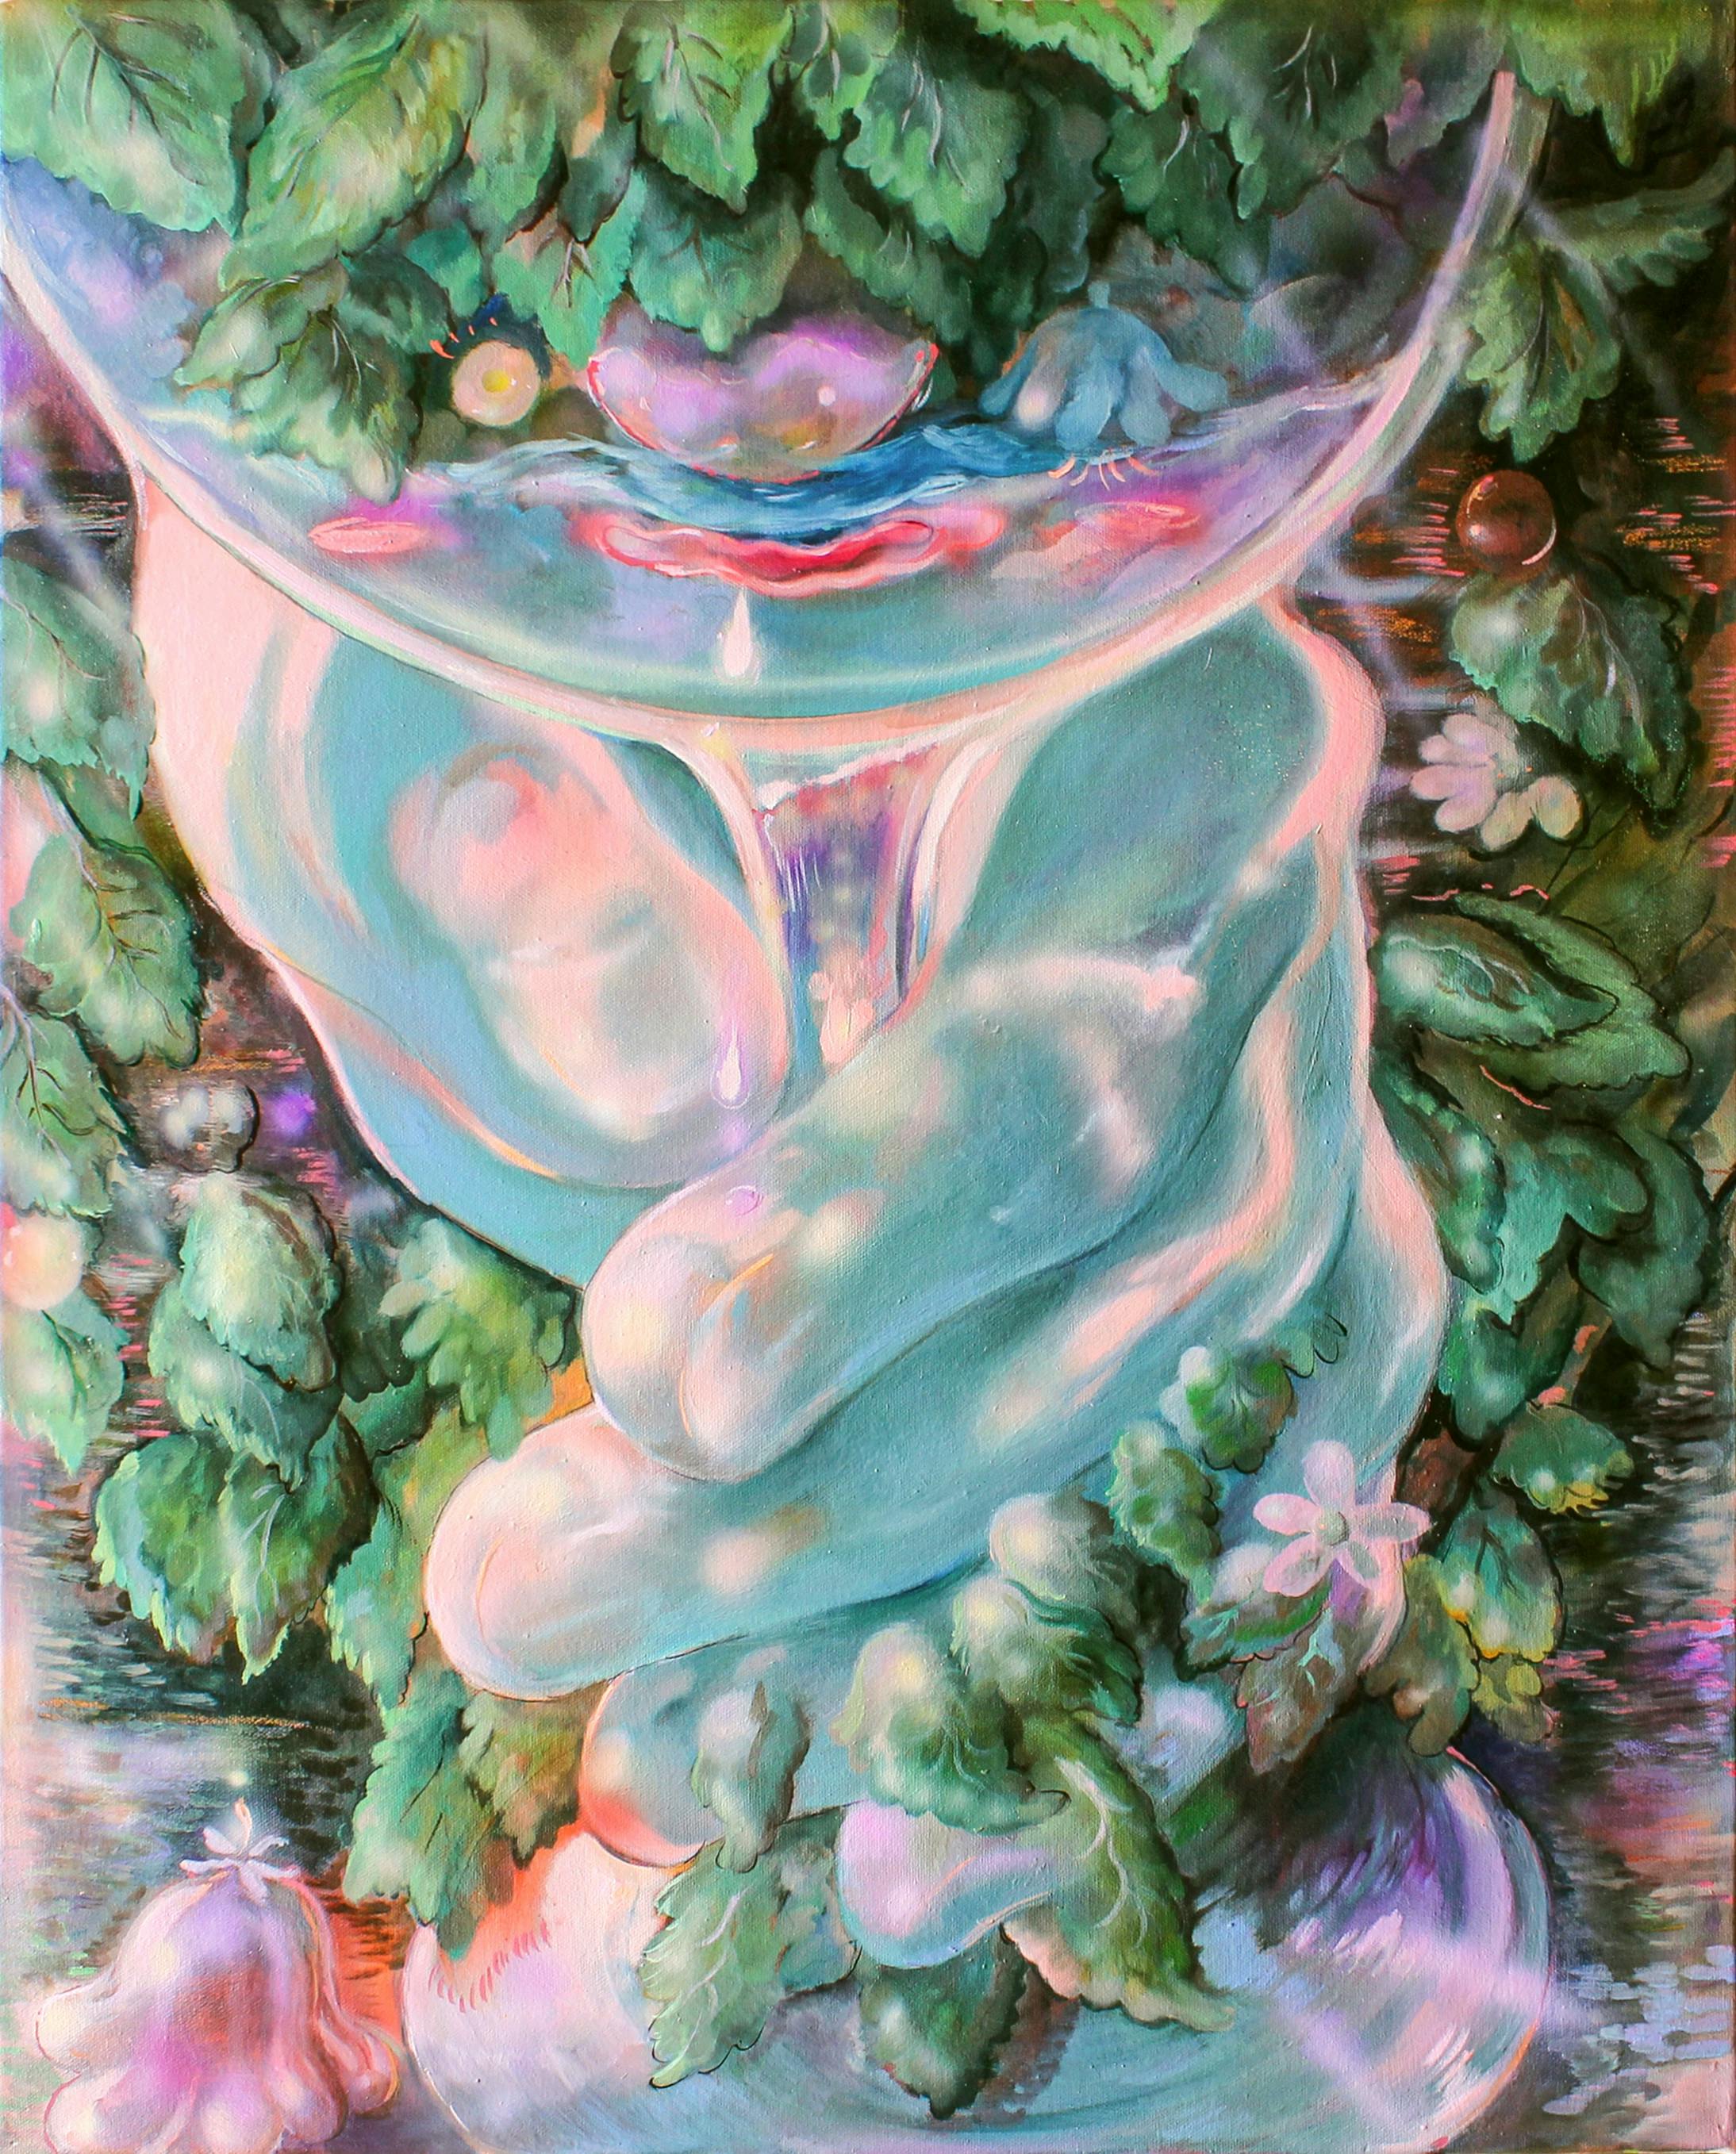 A teal, green, and pink painting of a hand holding a glass by Nefertiti Jenkins.